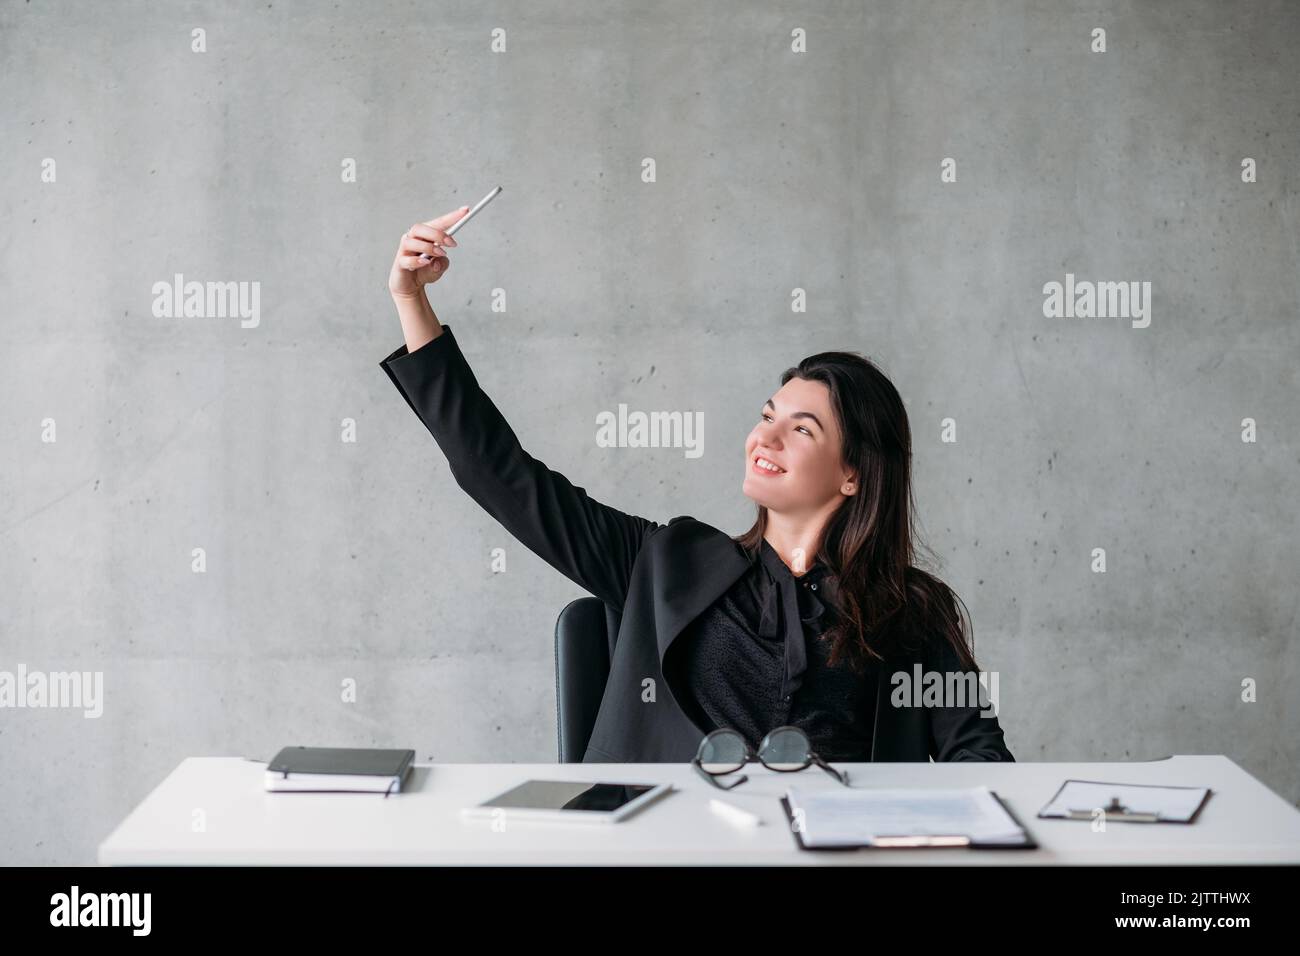 leadership ambitious self affected business woman Stock Photo